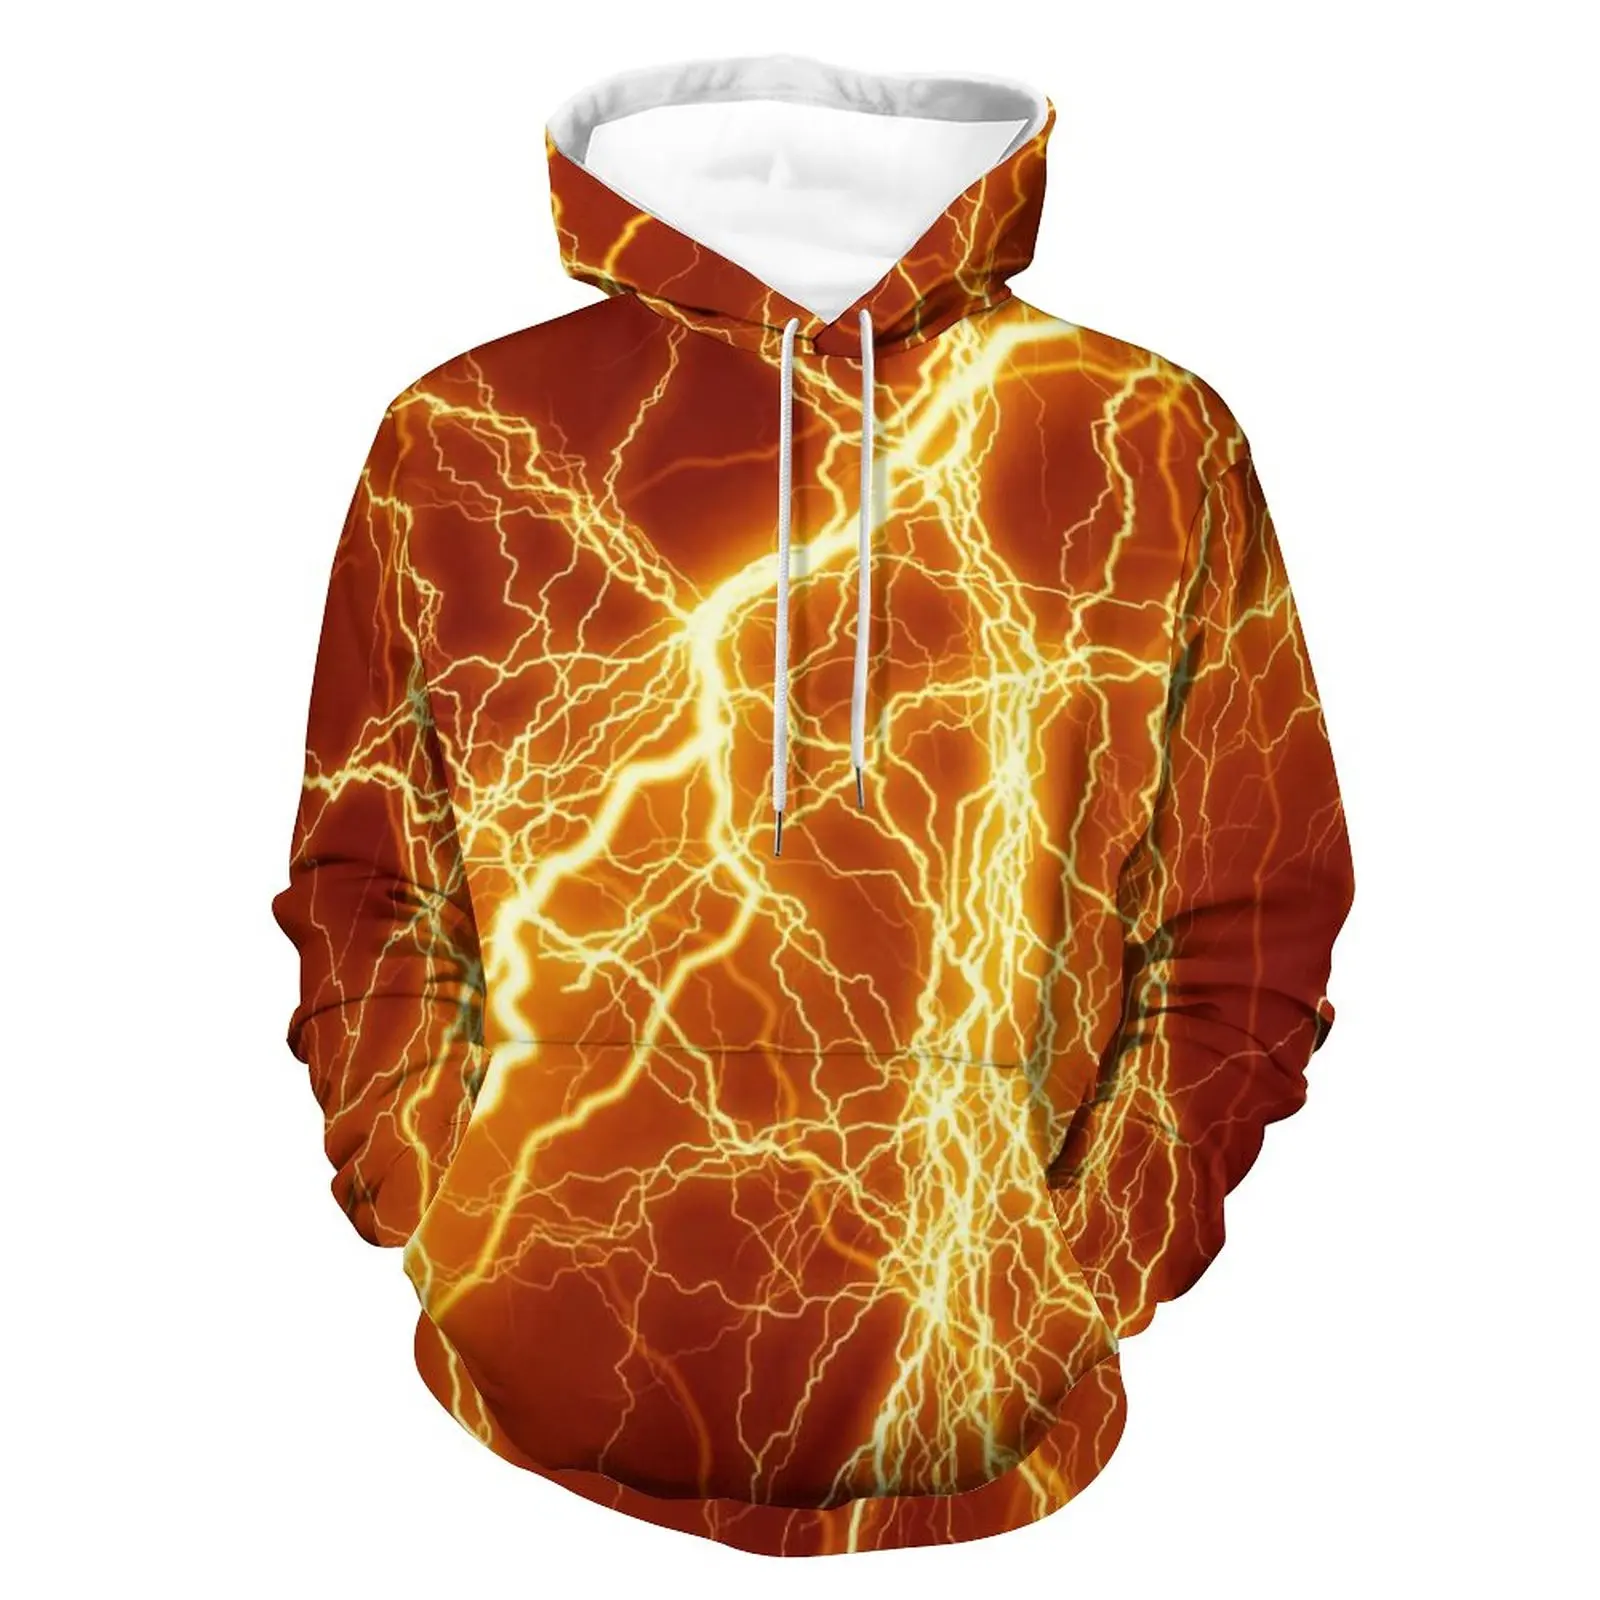 

Unisex Thunder Magma Novelty Hoodie 3D Printed Long Sleeve Leisure Pullover Hooded Sweatshirt with Pockets